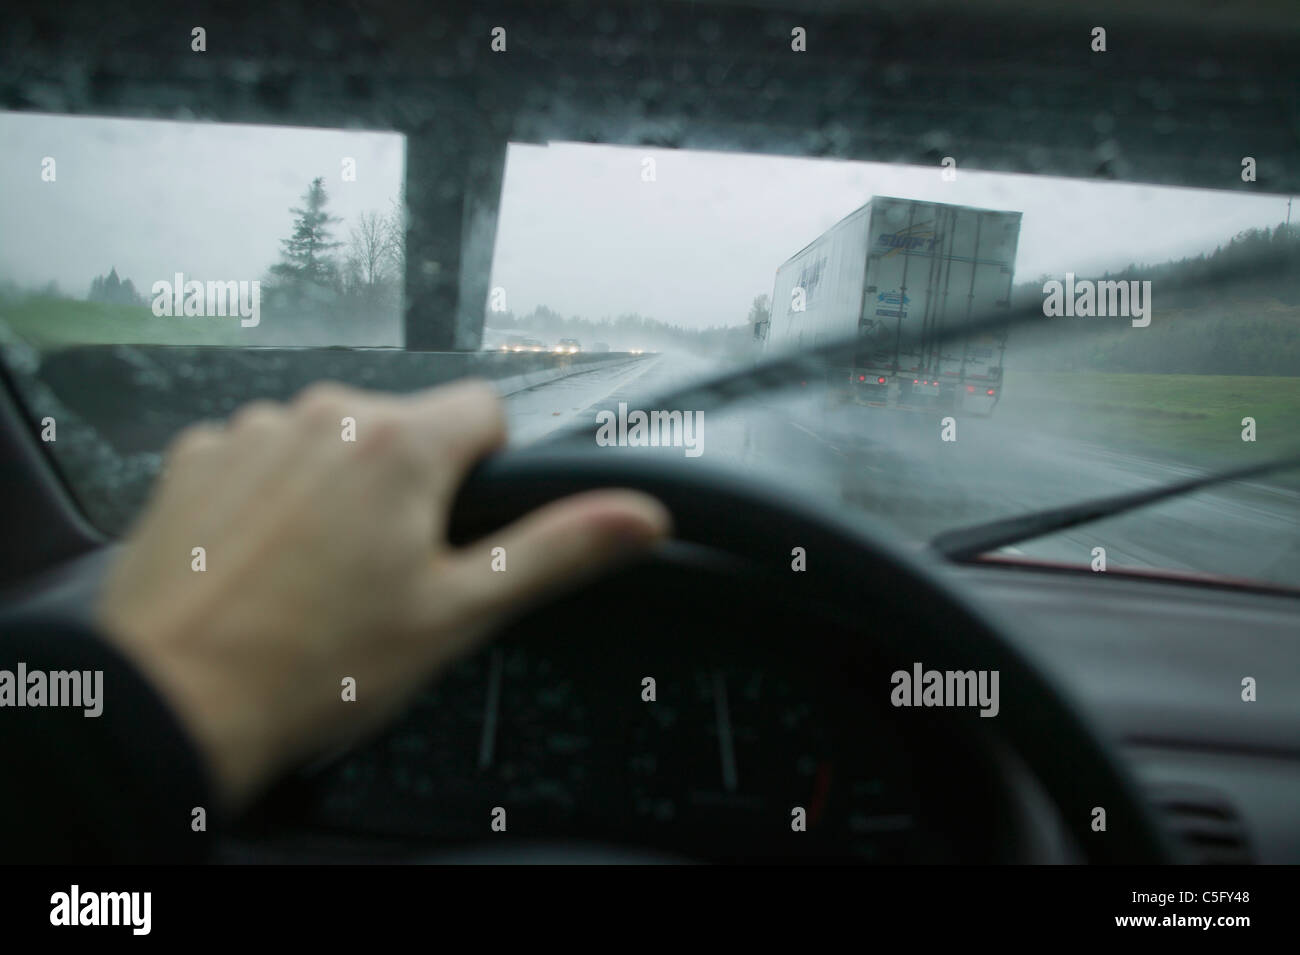 A first person perspective of driving in an automobile next to a truck trailer on a rainy day while passing below a overpass. Stock Photo